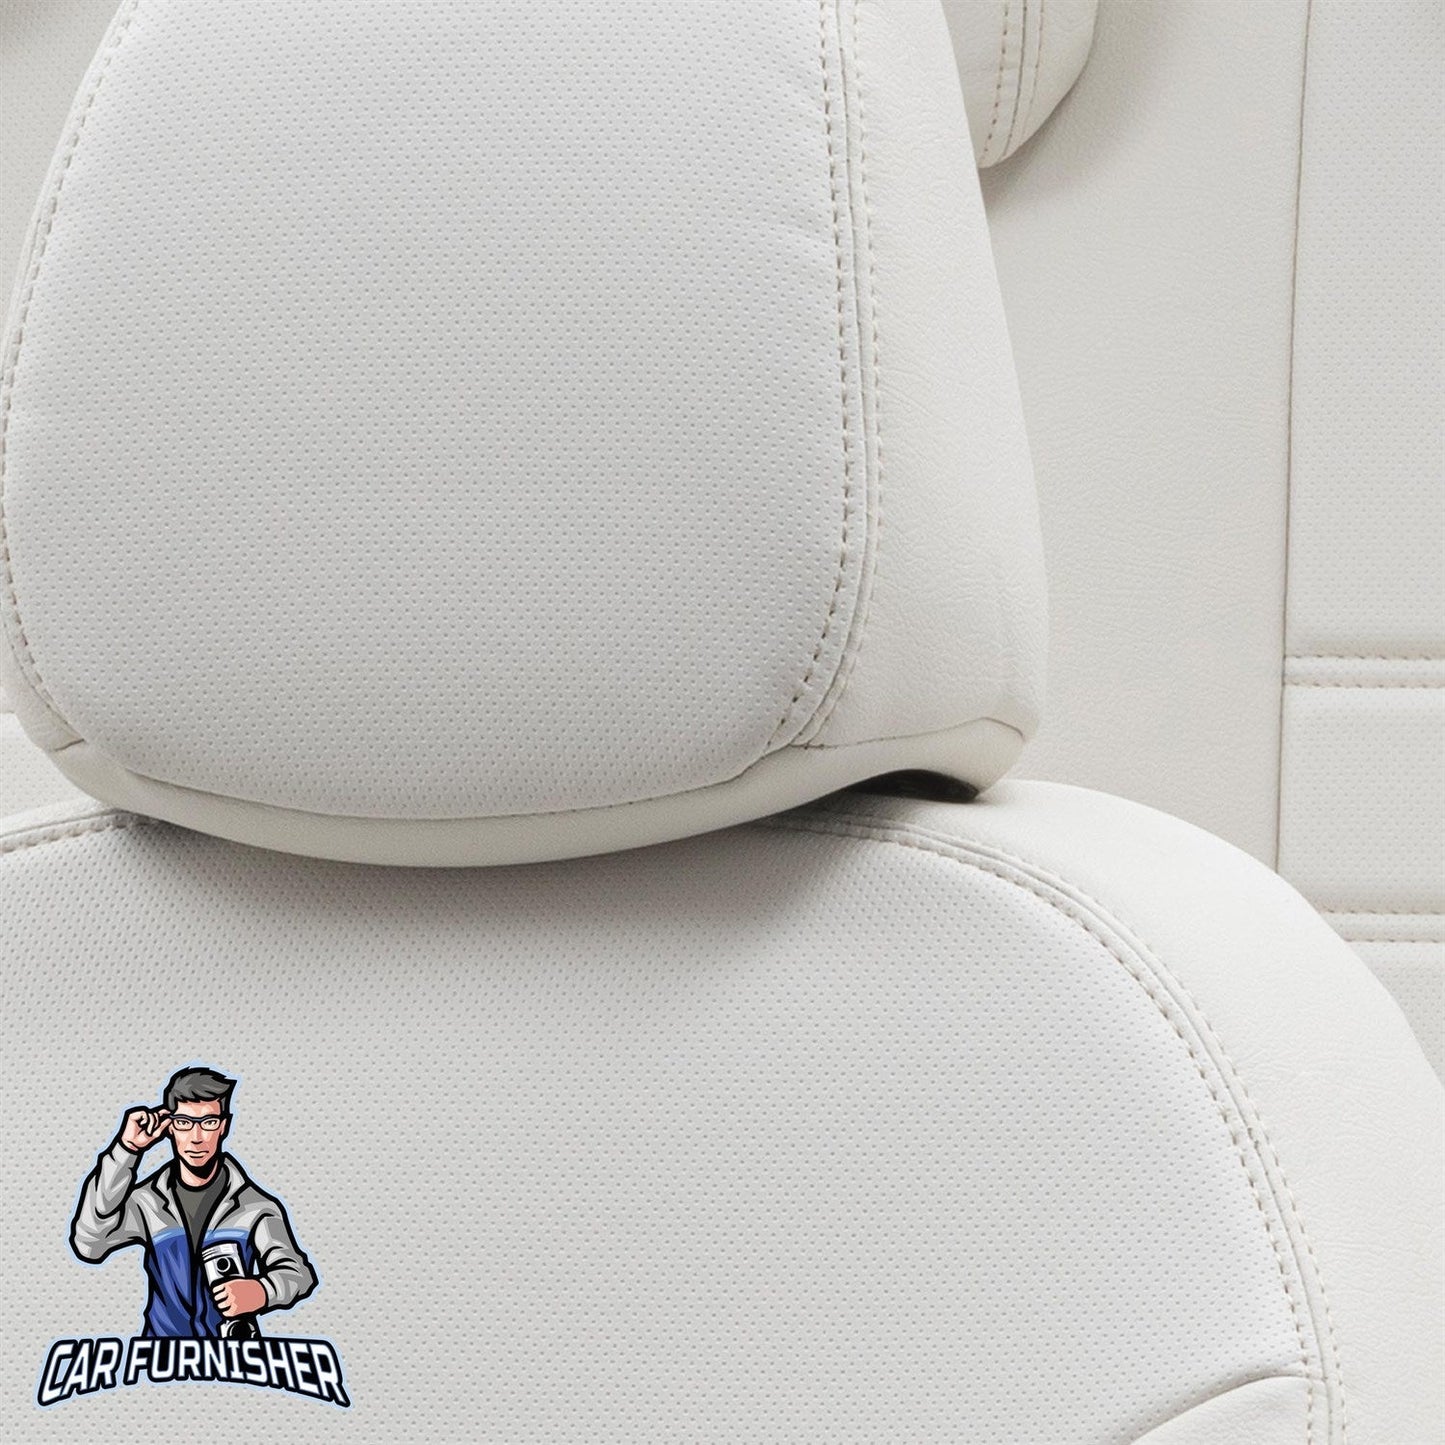 Dacia Sandero Seat Covers Istanbul Leather Design Ivory Leather